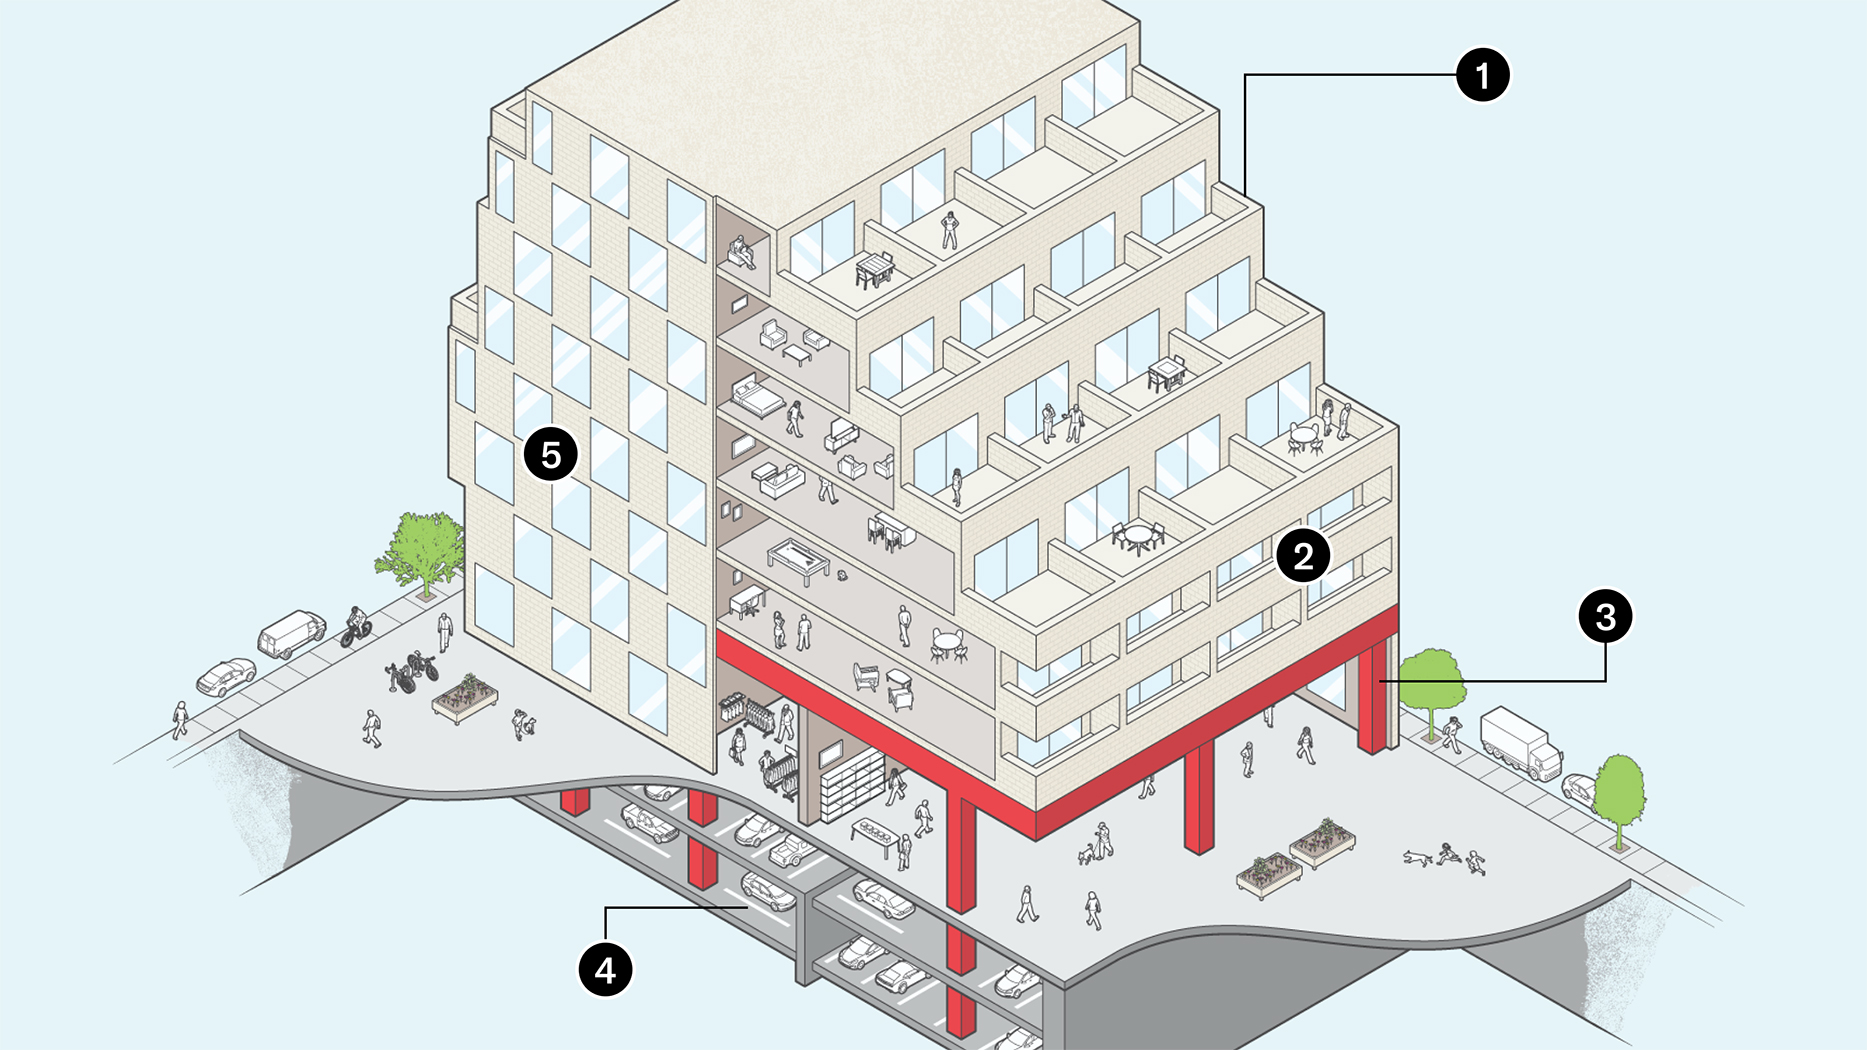 Digital illustration of a building with numbered parts. The walls of a section of the building are missing to show the interior of the units as well as part of the underground parking. People and furniture are visible in the units and ground floor and cars occupy the underground parking.